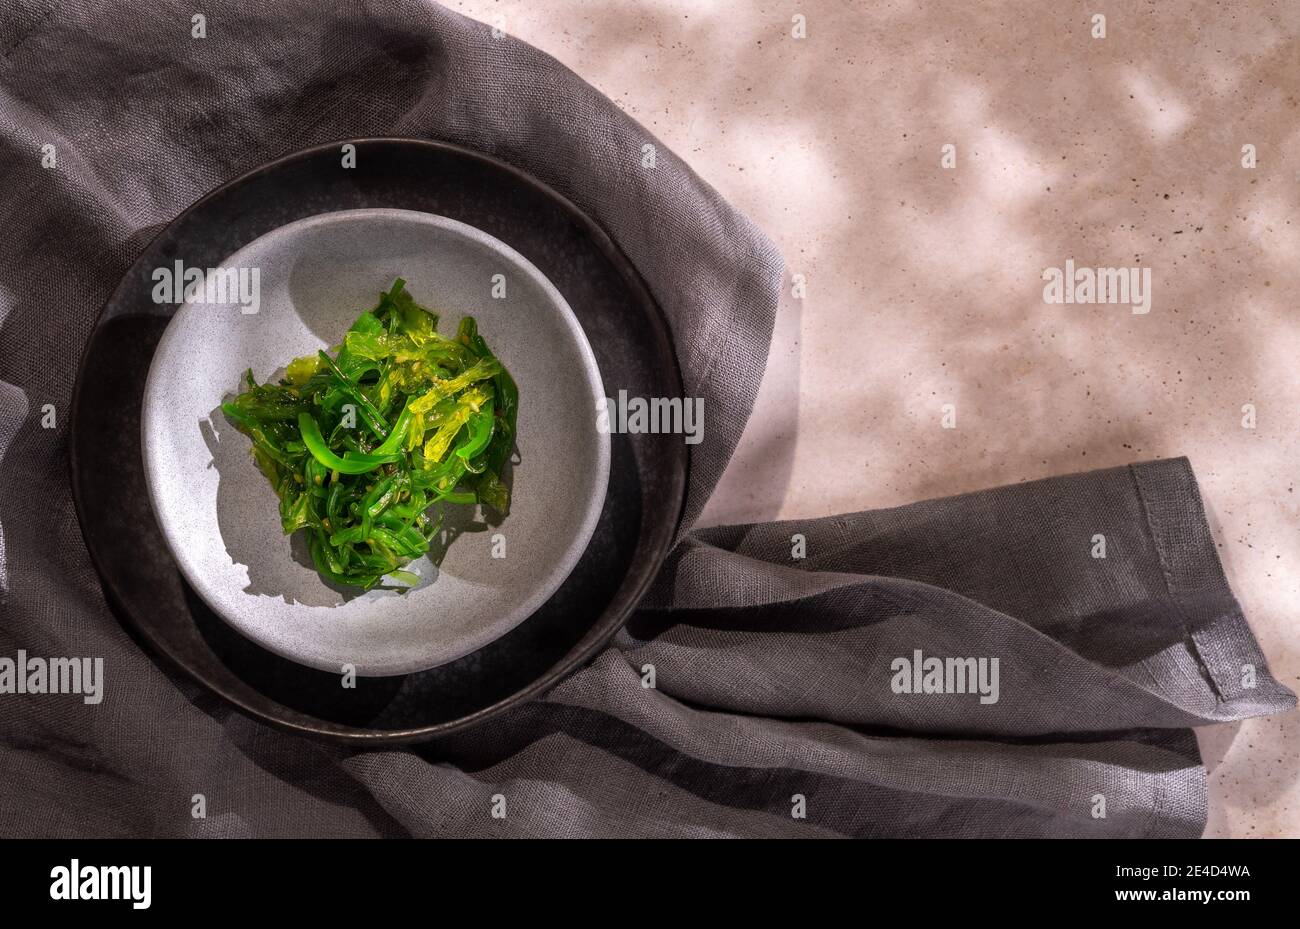 Green wakame seaweed Japanese salad over two plates and a grey napkin with copy space Stock Photo